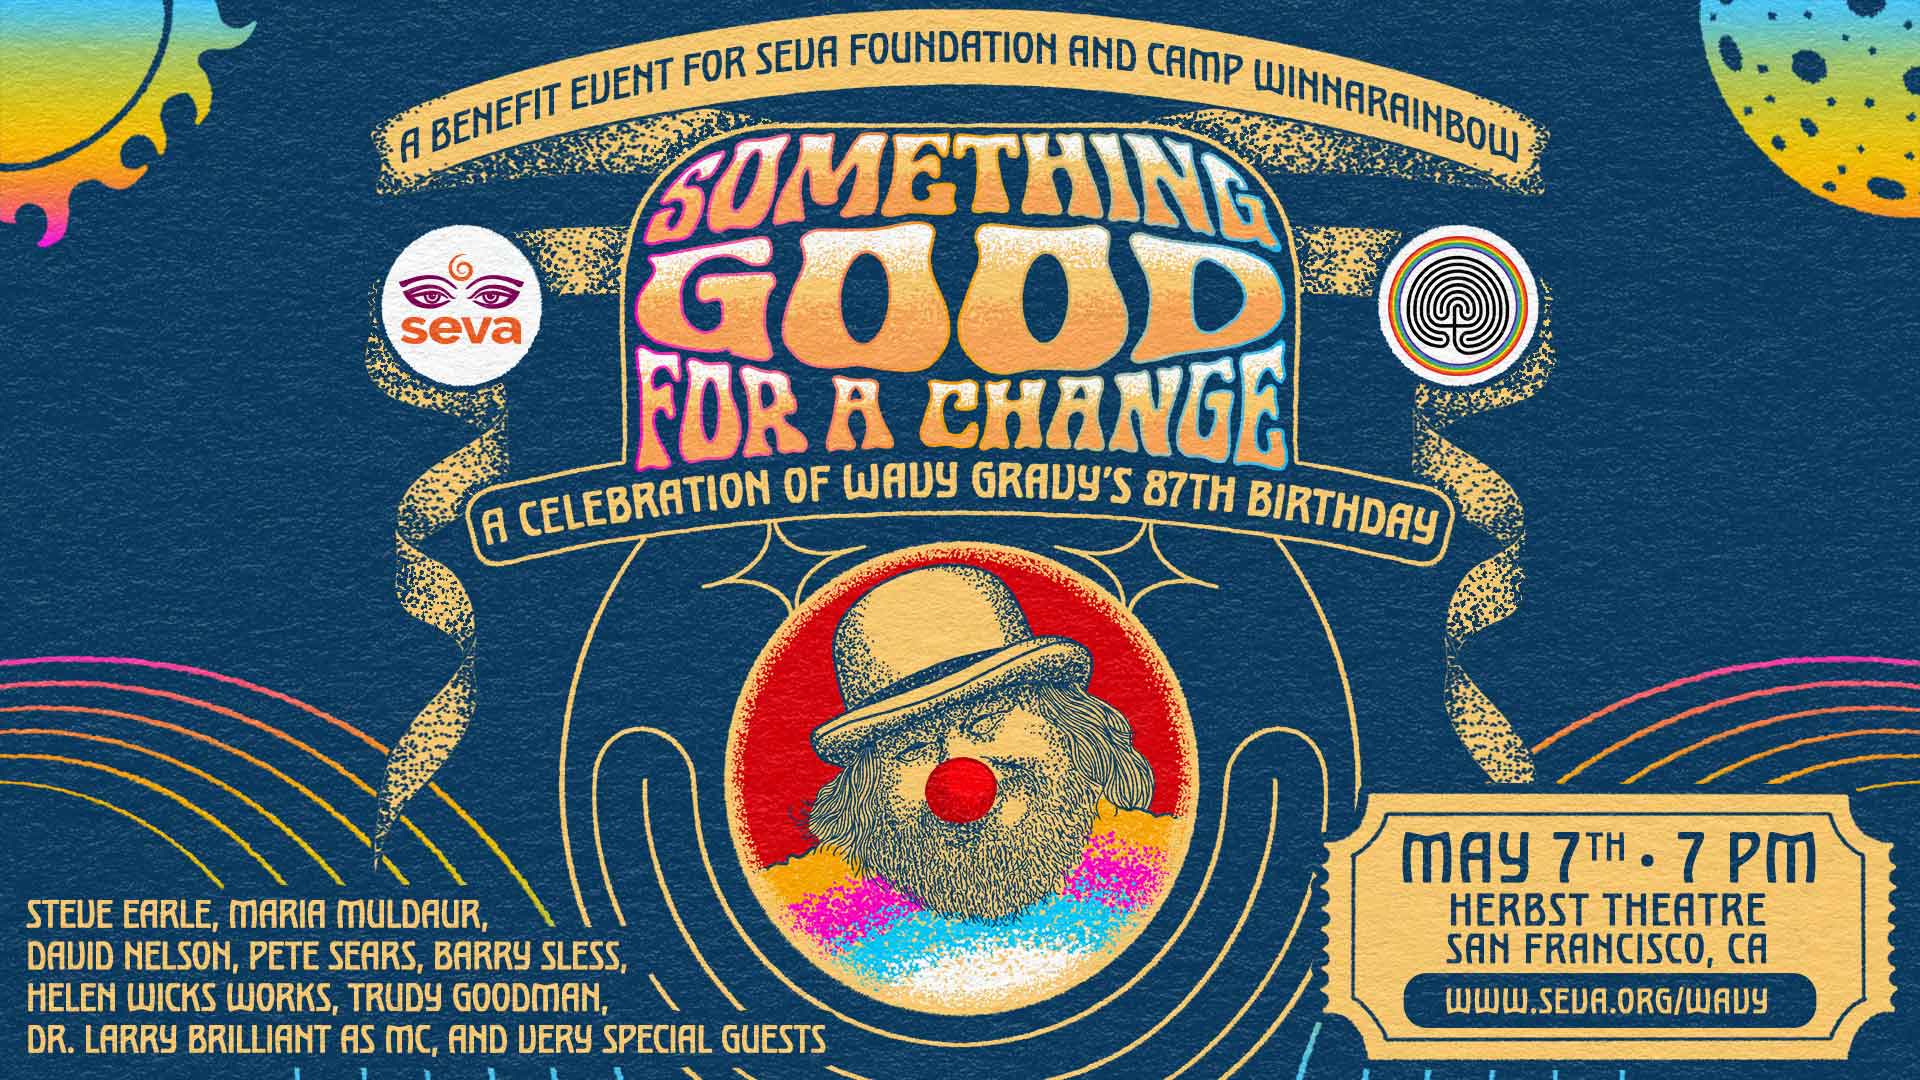 Something Good for a Change: A Celebration of Wavy Gravy's 87th Birthday! A Benefit for Seva Foundation and Camp Winnarainbow at Herbst Theatre in San Francisco on May 7th at 7 PM with Steve Earle, Maria Muldaur, David Nelson, Pete Sears, Barry Sless, Helen Wicks Works, Trudy Goodman, & Very Special Guests.